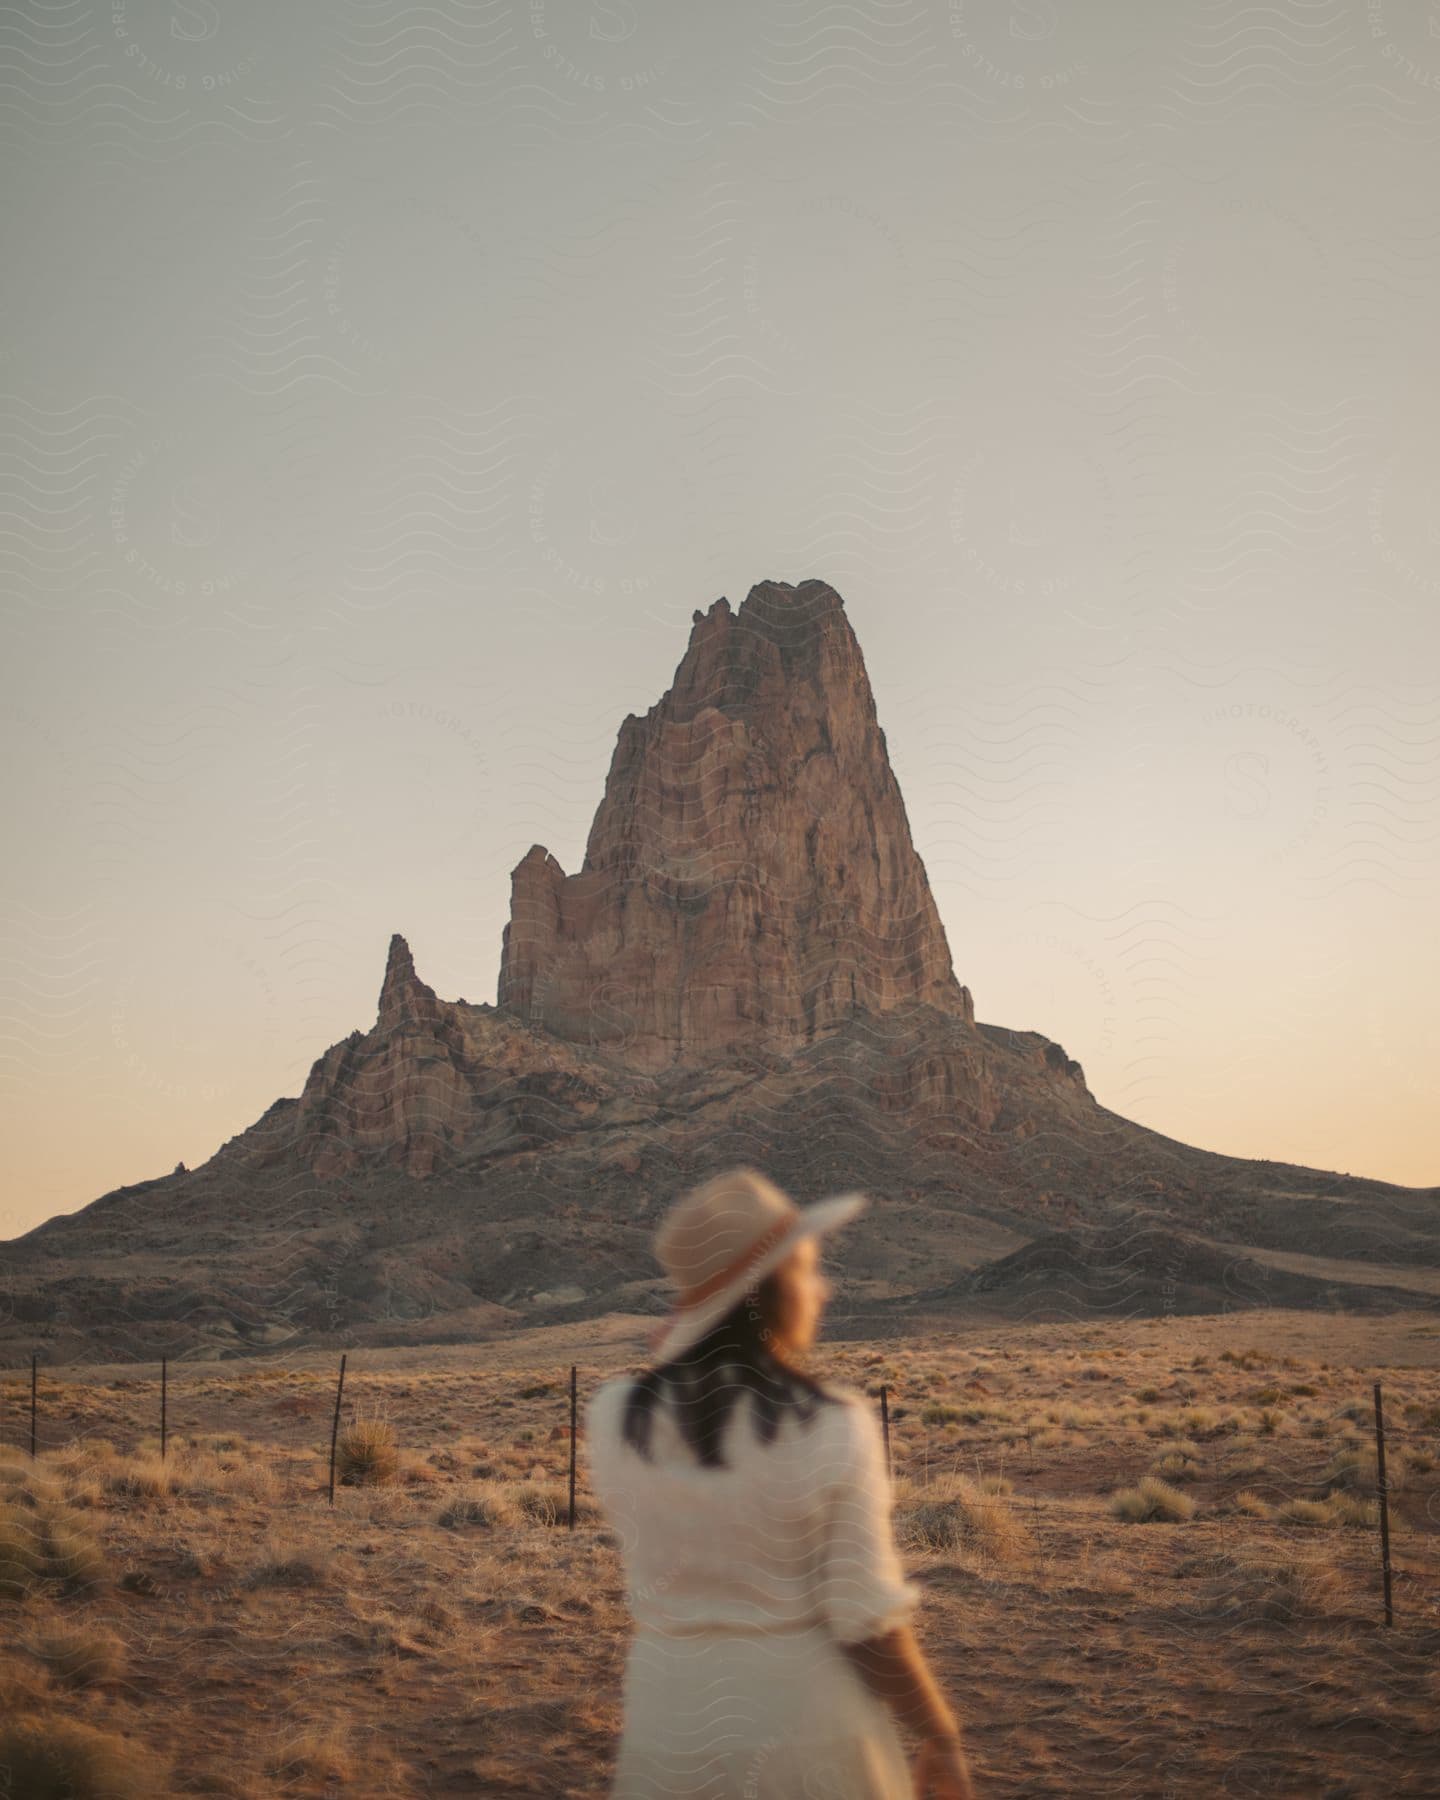 A woman wearing a cowboy hat is walking toward a fence with a mountainous rock formation in the distance